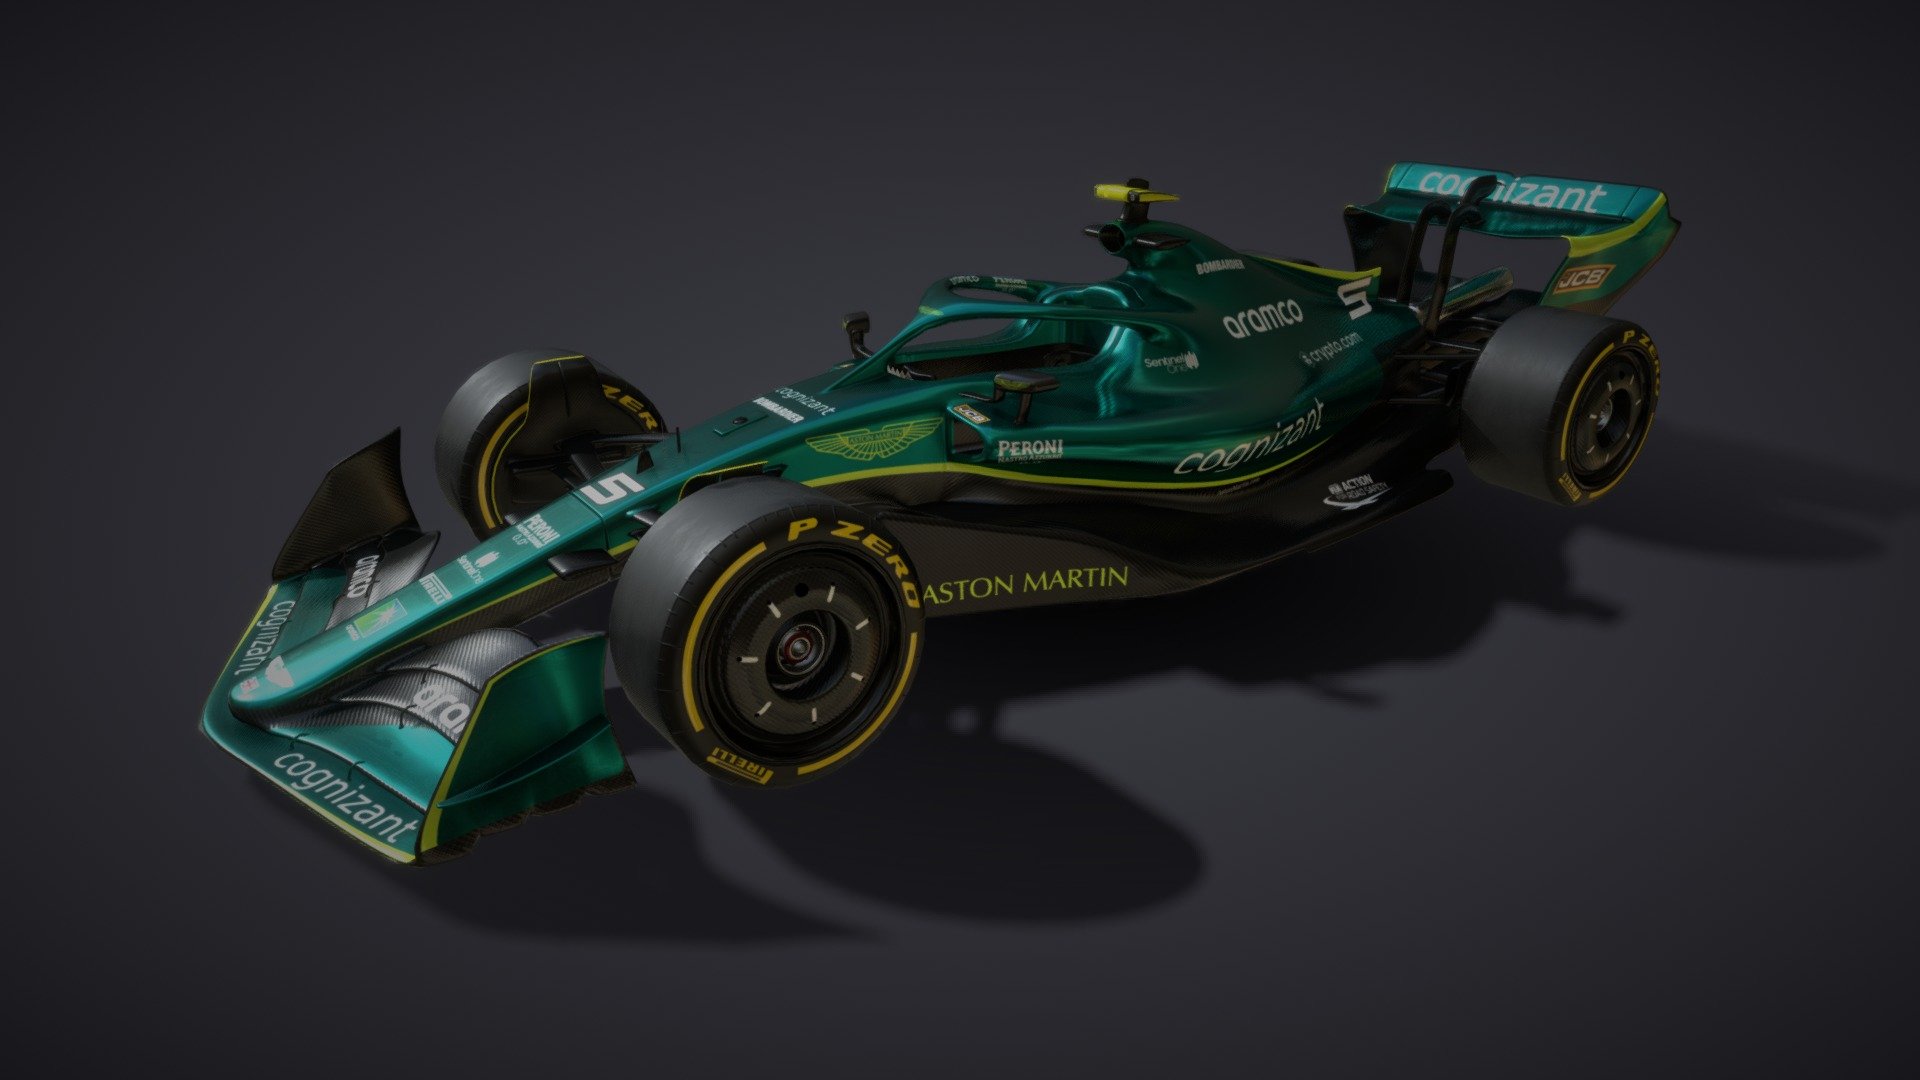 Formula 1 car modelled in stunning detail to accurately represent the new generation of F1 cars for the 2022 season. This model features the Aston Martin livery as seen on the 2022 Aston Martin AMR22 car. The model includes a fully rigged and animated DRS rear wing, removable wheels and removable front wing (see images below). The high resolution model has been baked into an optimised mesh for easy rendering and game engine use. The model is subdivision-ready with 4k textures.

The additional files include the asset as FBX, OBJ and STL file formats. Also included is the original Blender file with all of the individual parts used for modelling the asset. I've also added extra textures for different Pirelli tyre compounds (soft, medium and hard).

The included Blender file is set up with all the textures and settings you need to immediately start rendering this image:


Front wing and wheels can easily be removed:
 - F1 2022 Aston Martin Livery - Buy Royalty Free 3D model by Nick Broad (@nickbroad) 3d model